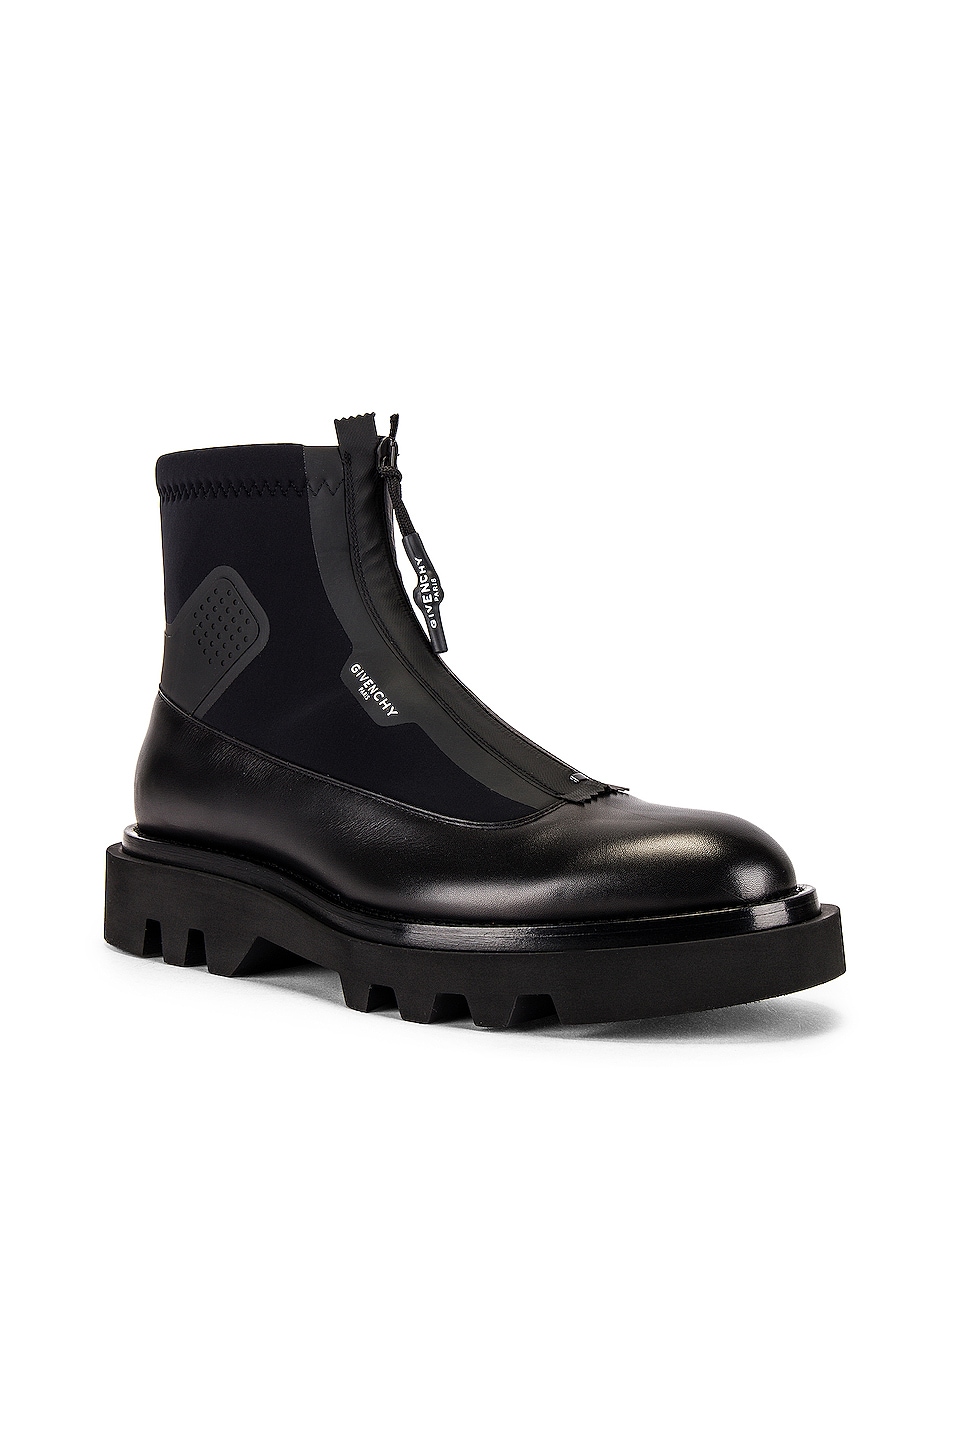 Givenchy Combat Boot With Zip in Black | FWRD